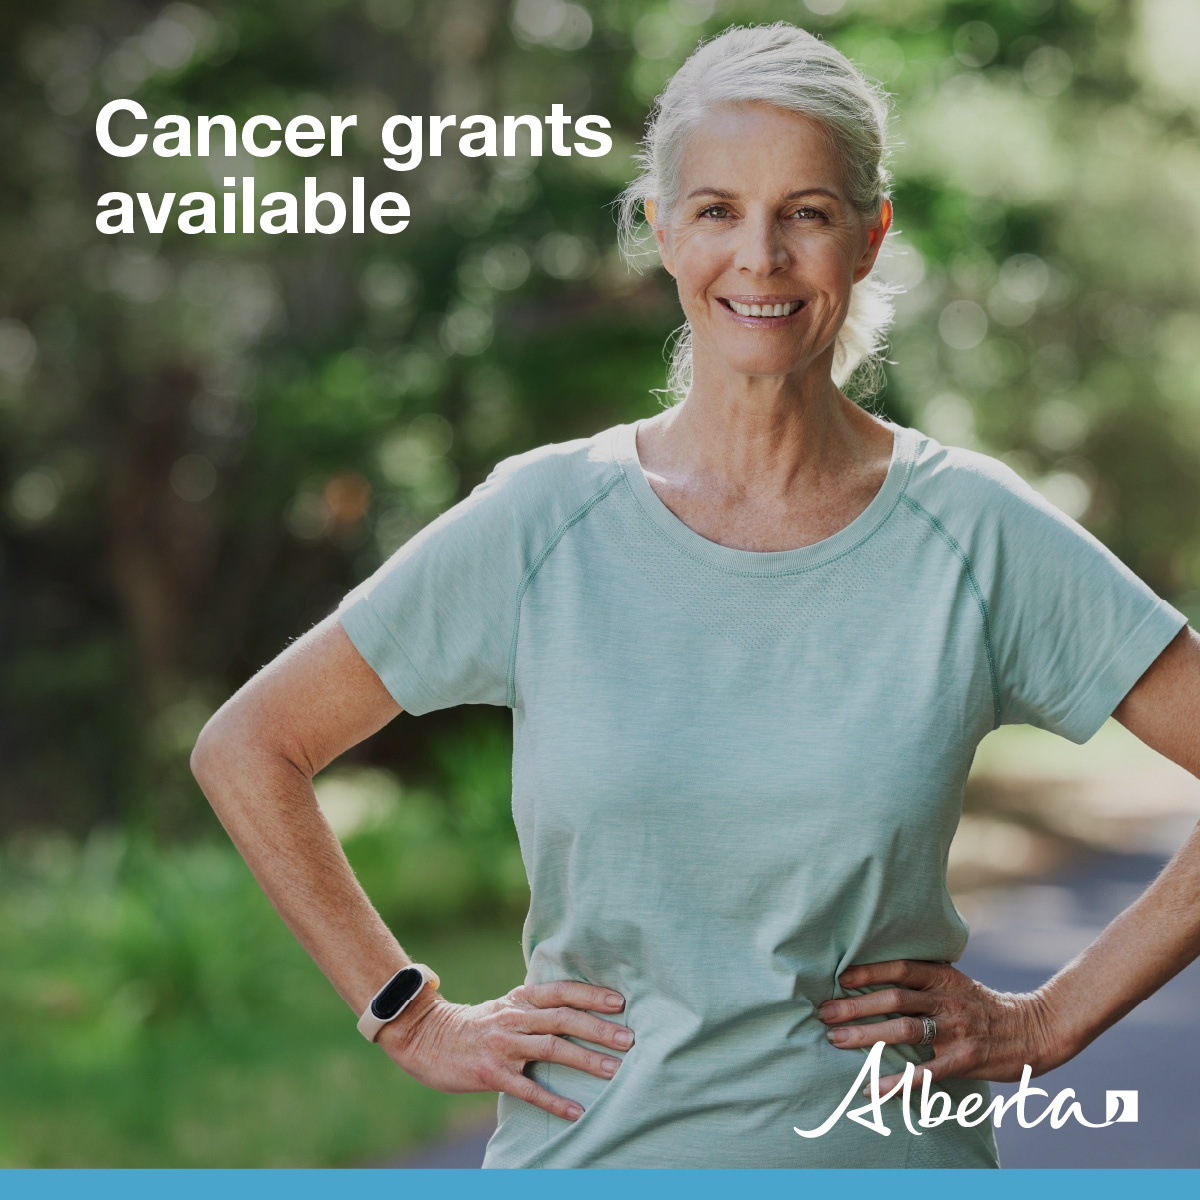 Up to $1 M in funding is available for projects to improve cancer prevention and screening. Eligible applicants include non-profits, post-secondary institutions, municipalities and Indigenous communities: alberta.ca/cancer-researc…